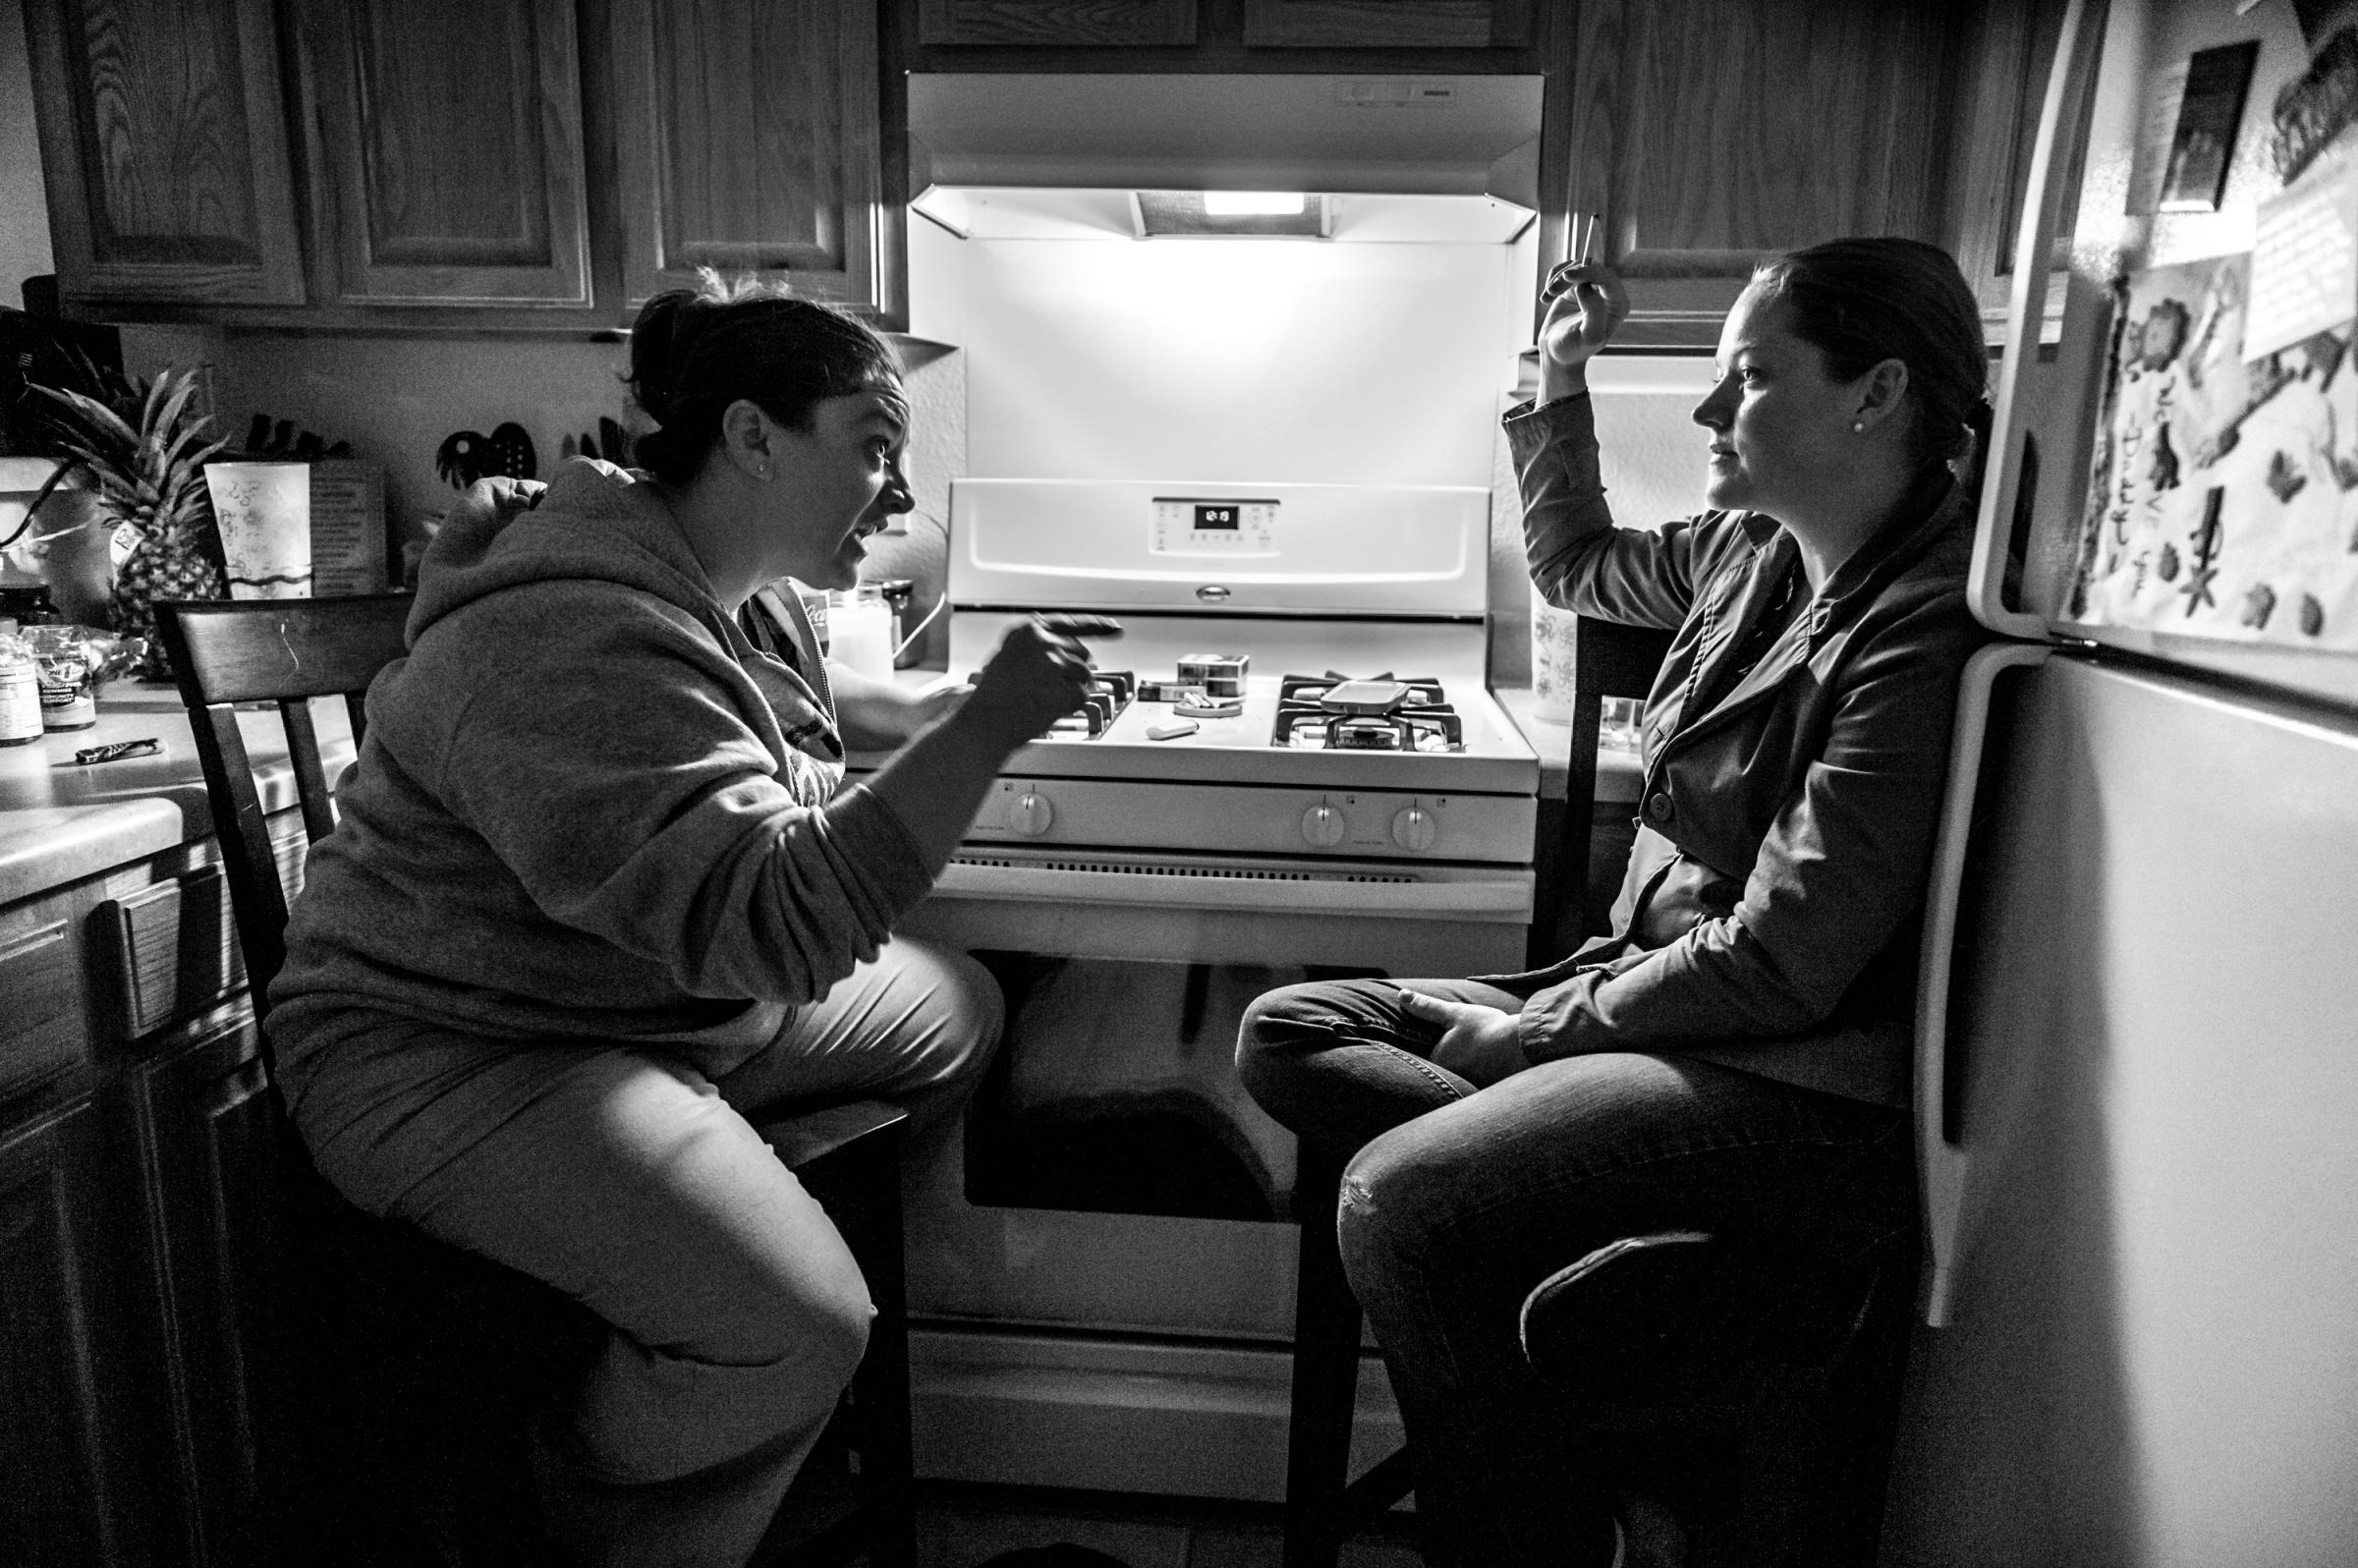 Military rape survivors Jennifer Norris and Jessica Hinves, chain-smoke and discuss their rapes late into the night at Jessica's home in Biloxi, Mississippi. Jennifer Norris was drugged and raped by her recruiter after joining the US Air Force when she was 21 years old. "It’s like being in a domestic violence marriage that you can't get divorced from," she said. Jessica Hinves, was an Air Force fighter jet mechanic when a member of her squadron at Nellis Air Force Base raped her. The case against her rapist was thrown out the day before the trial was to begin by a commander who said "Though he didn't act like a gentleman, there was no reason to prosecute."